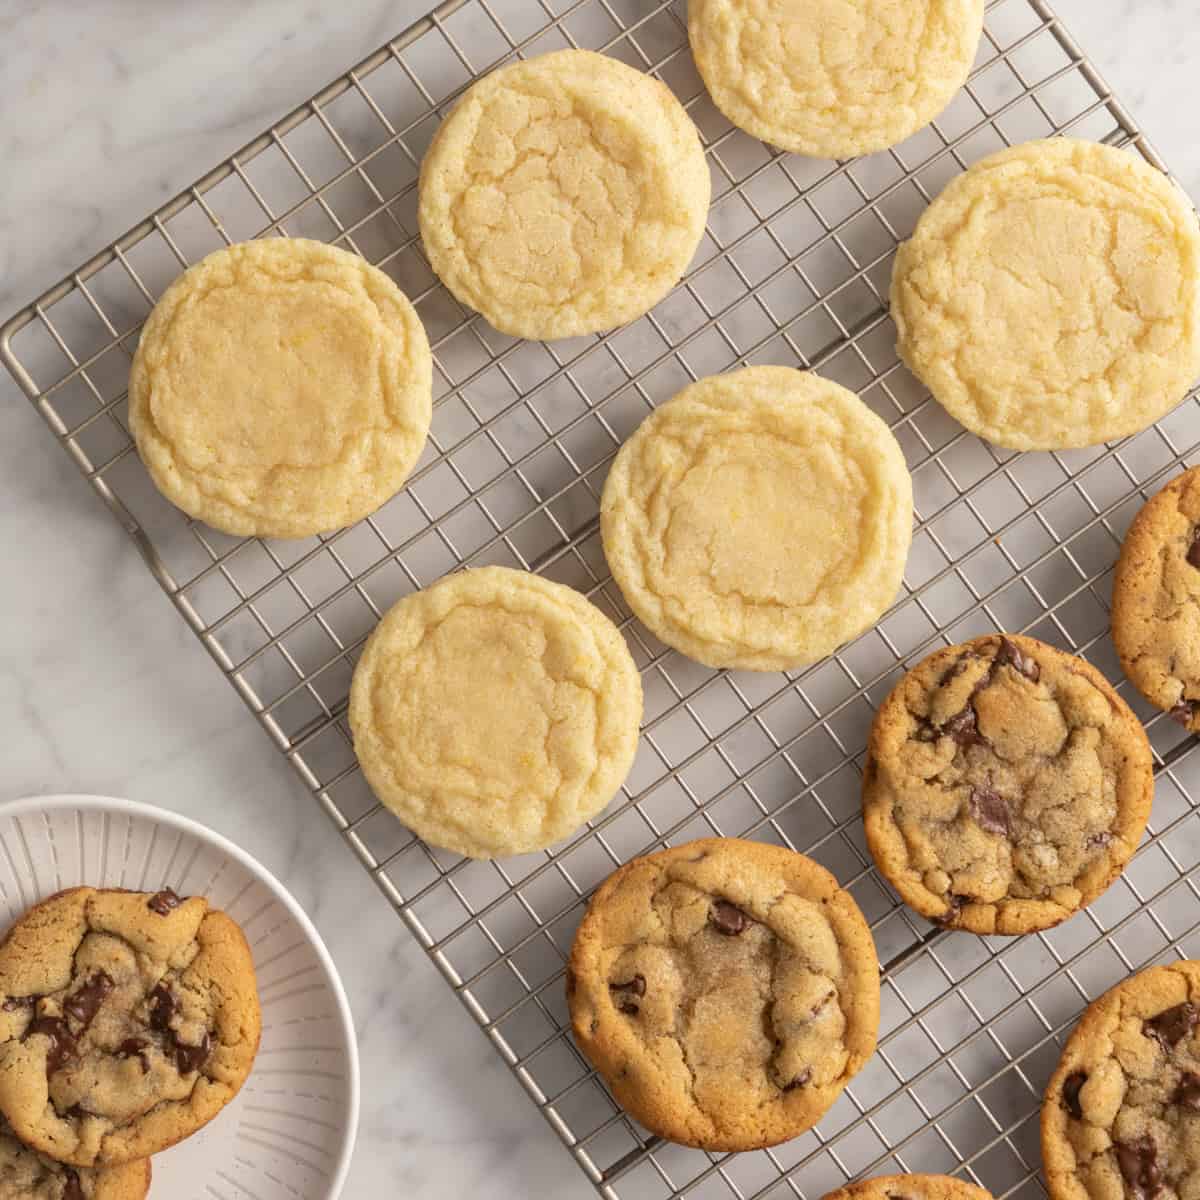 Biggest Baking Mistakes People Make With Cookies and How to Avoid Them